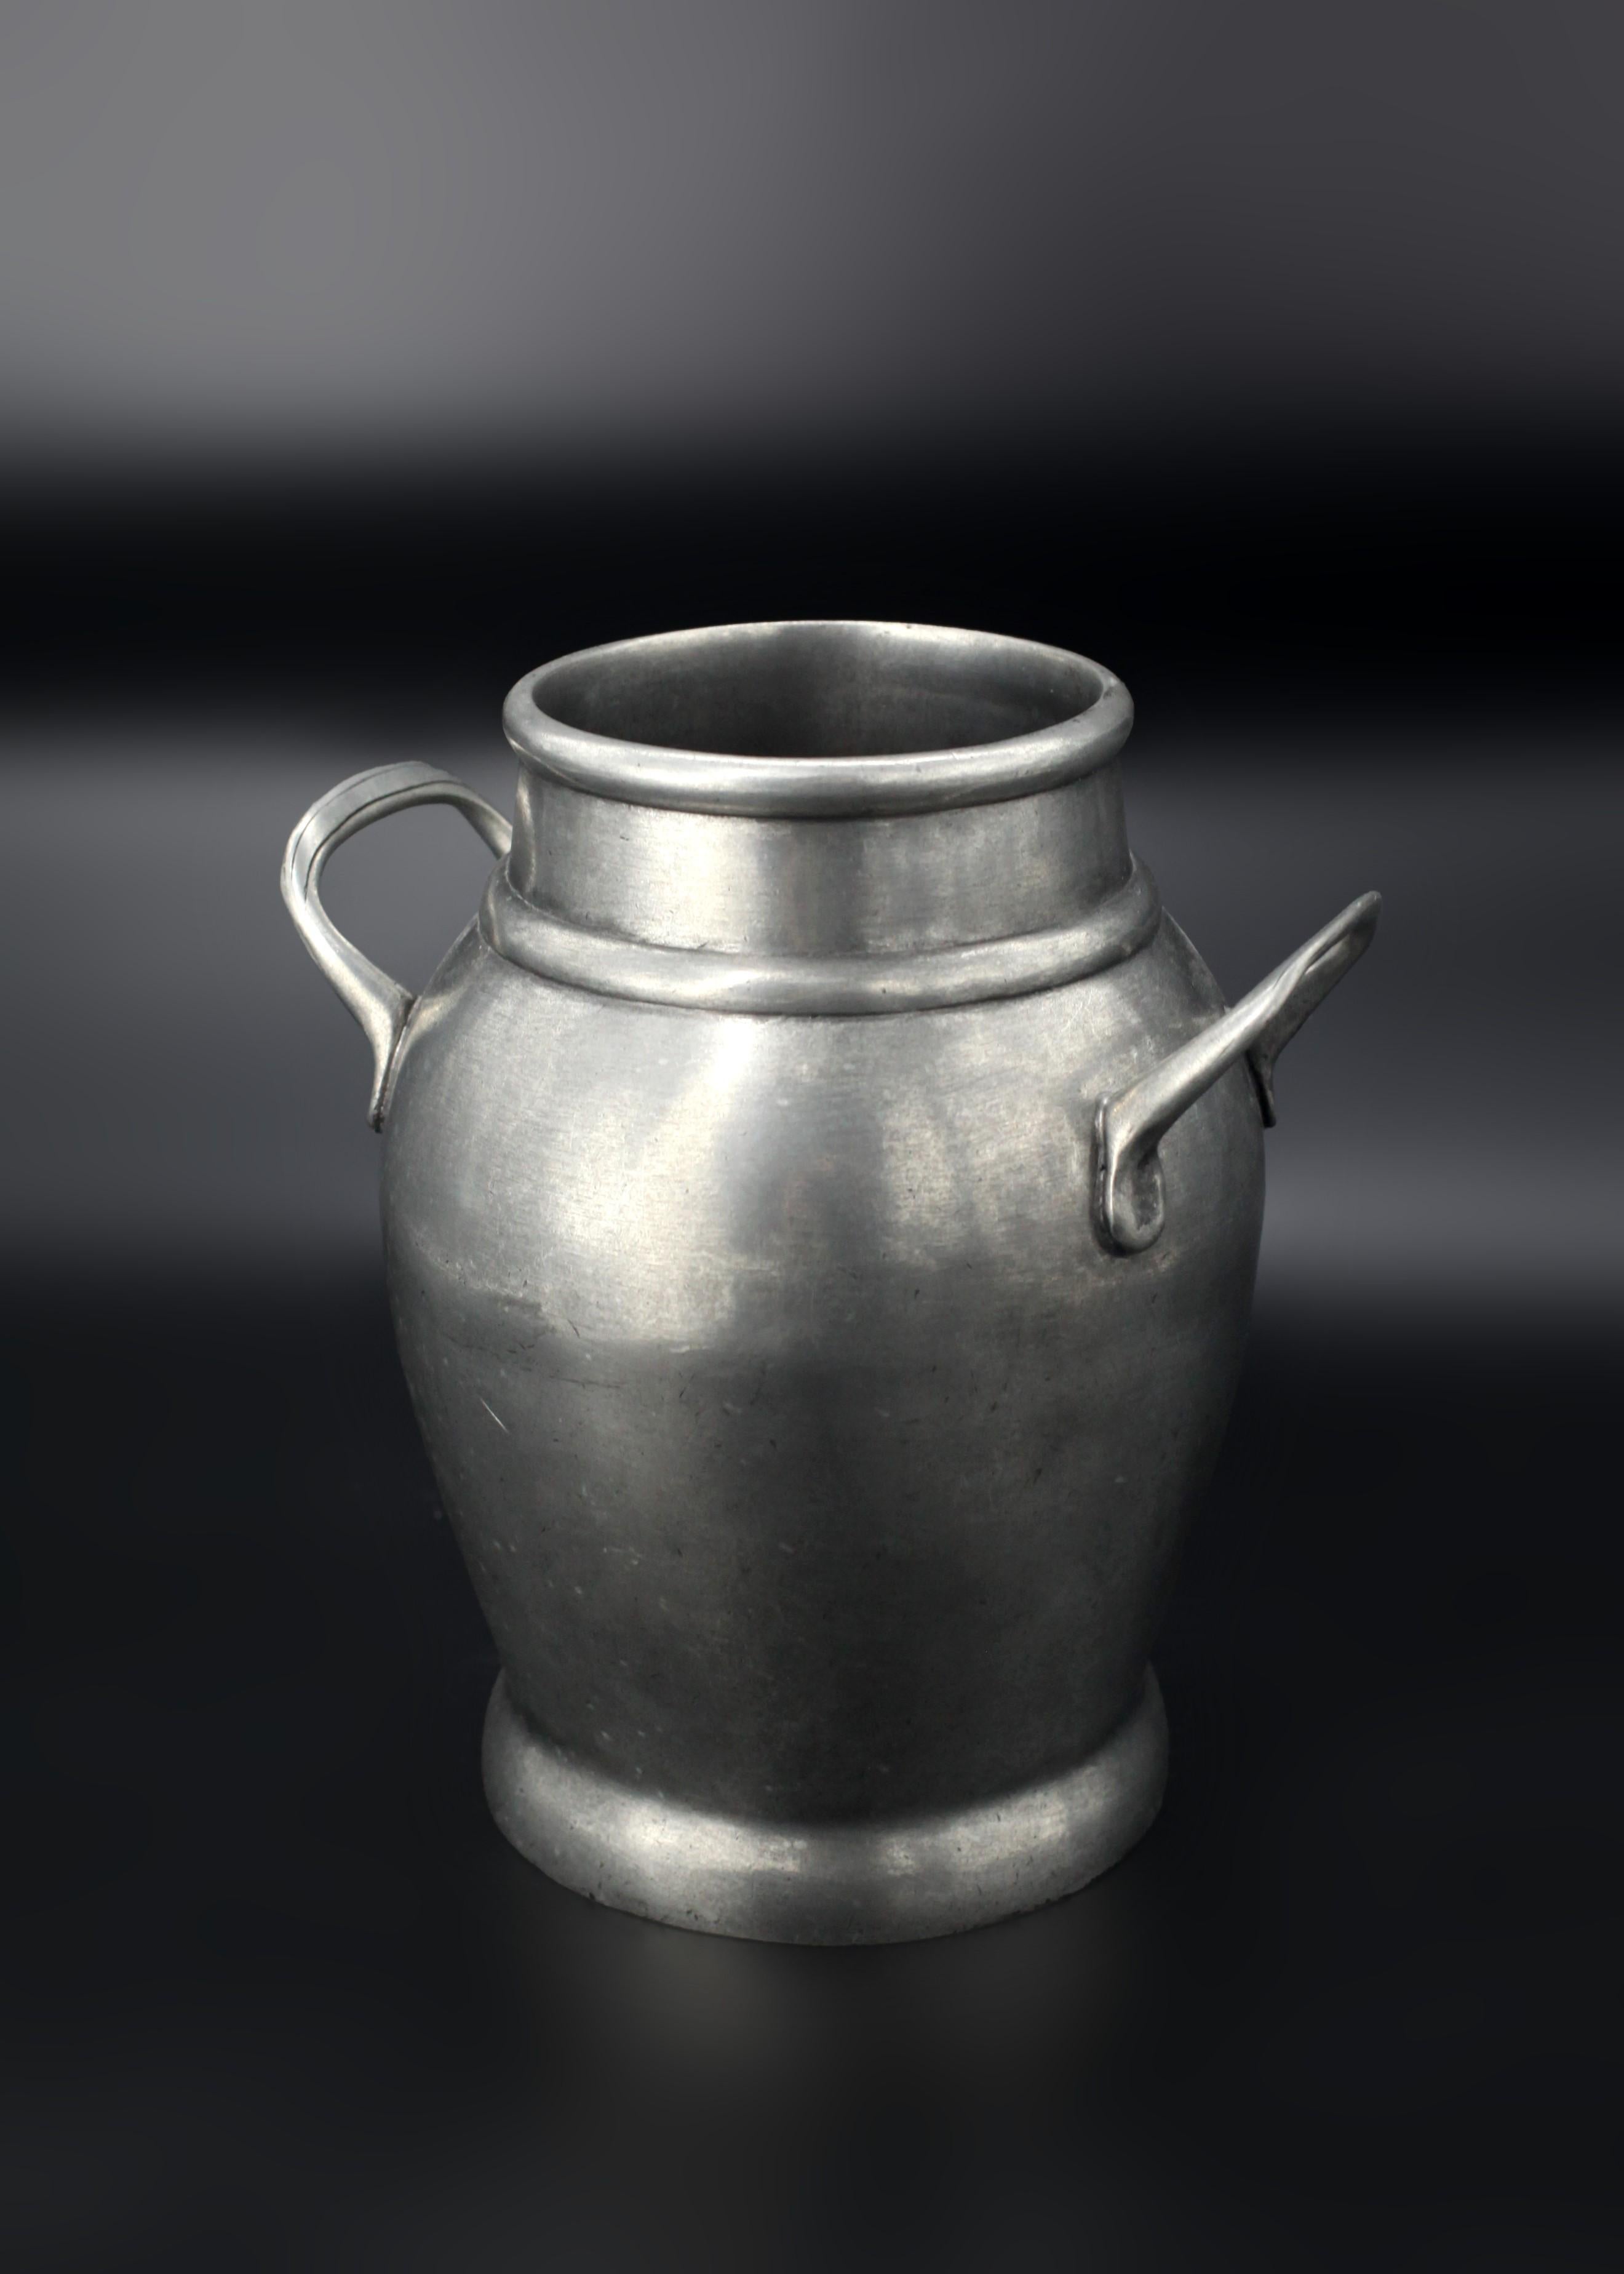 Robust and unyielding, this Kenneth Turner Pewter Vase commands attention with its striking presence. Crafted in the 20th century by renowned designer Kenneth Turner, the hefty vase’s unmistakable quality communicates an air of practicality and